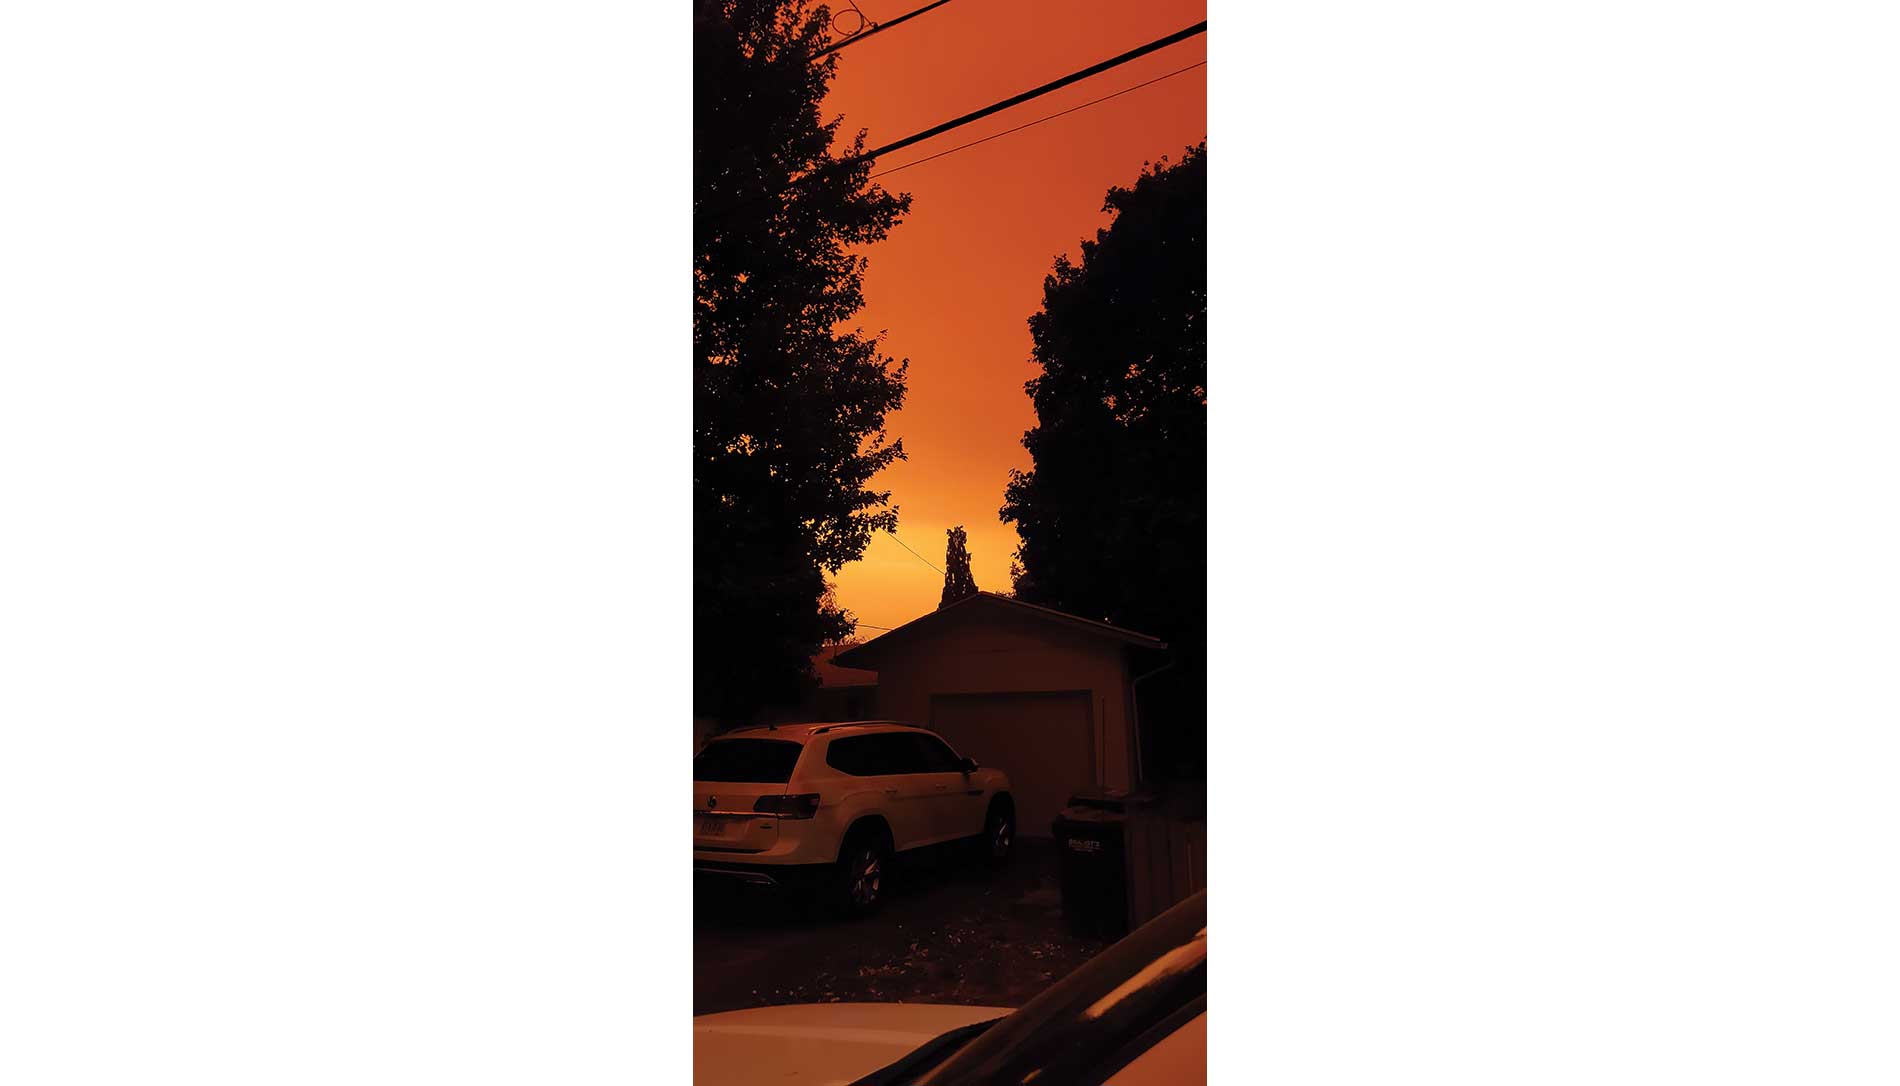 Orange smoke fills the sky over a house and cars. Image by Mark Hopkins, Cherry City Electric.